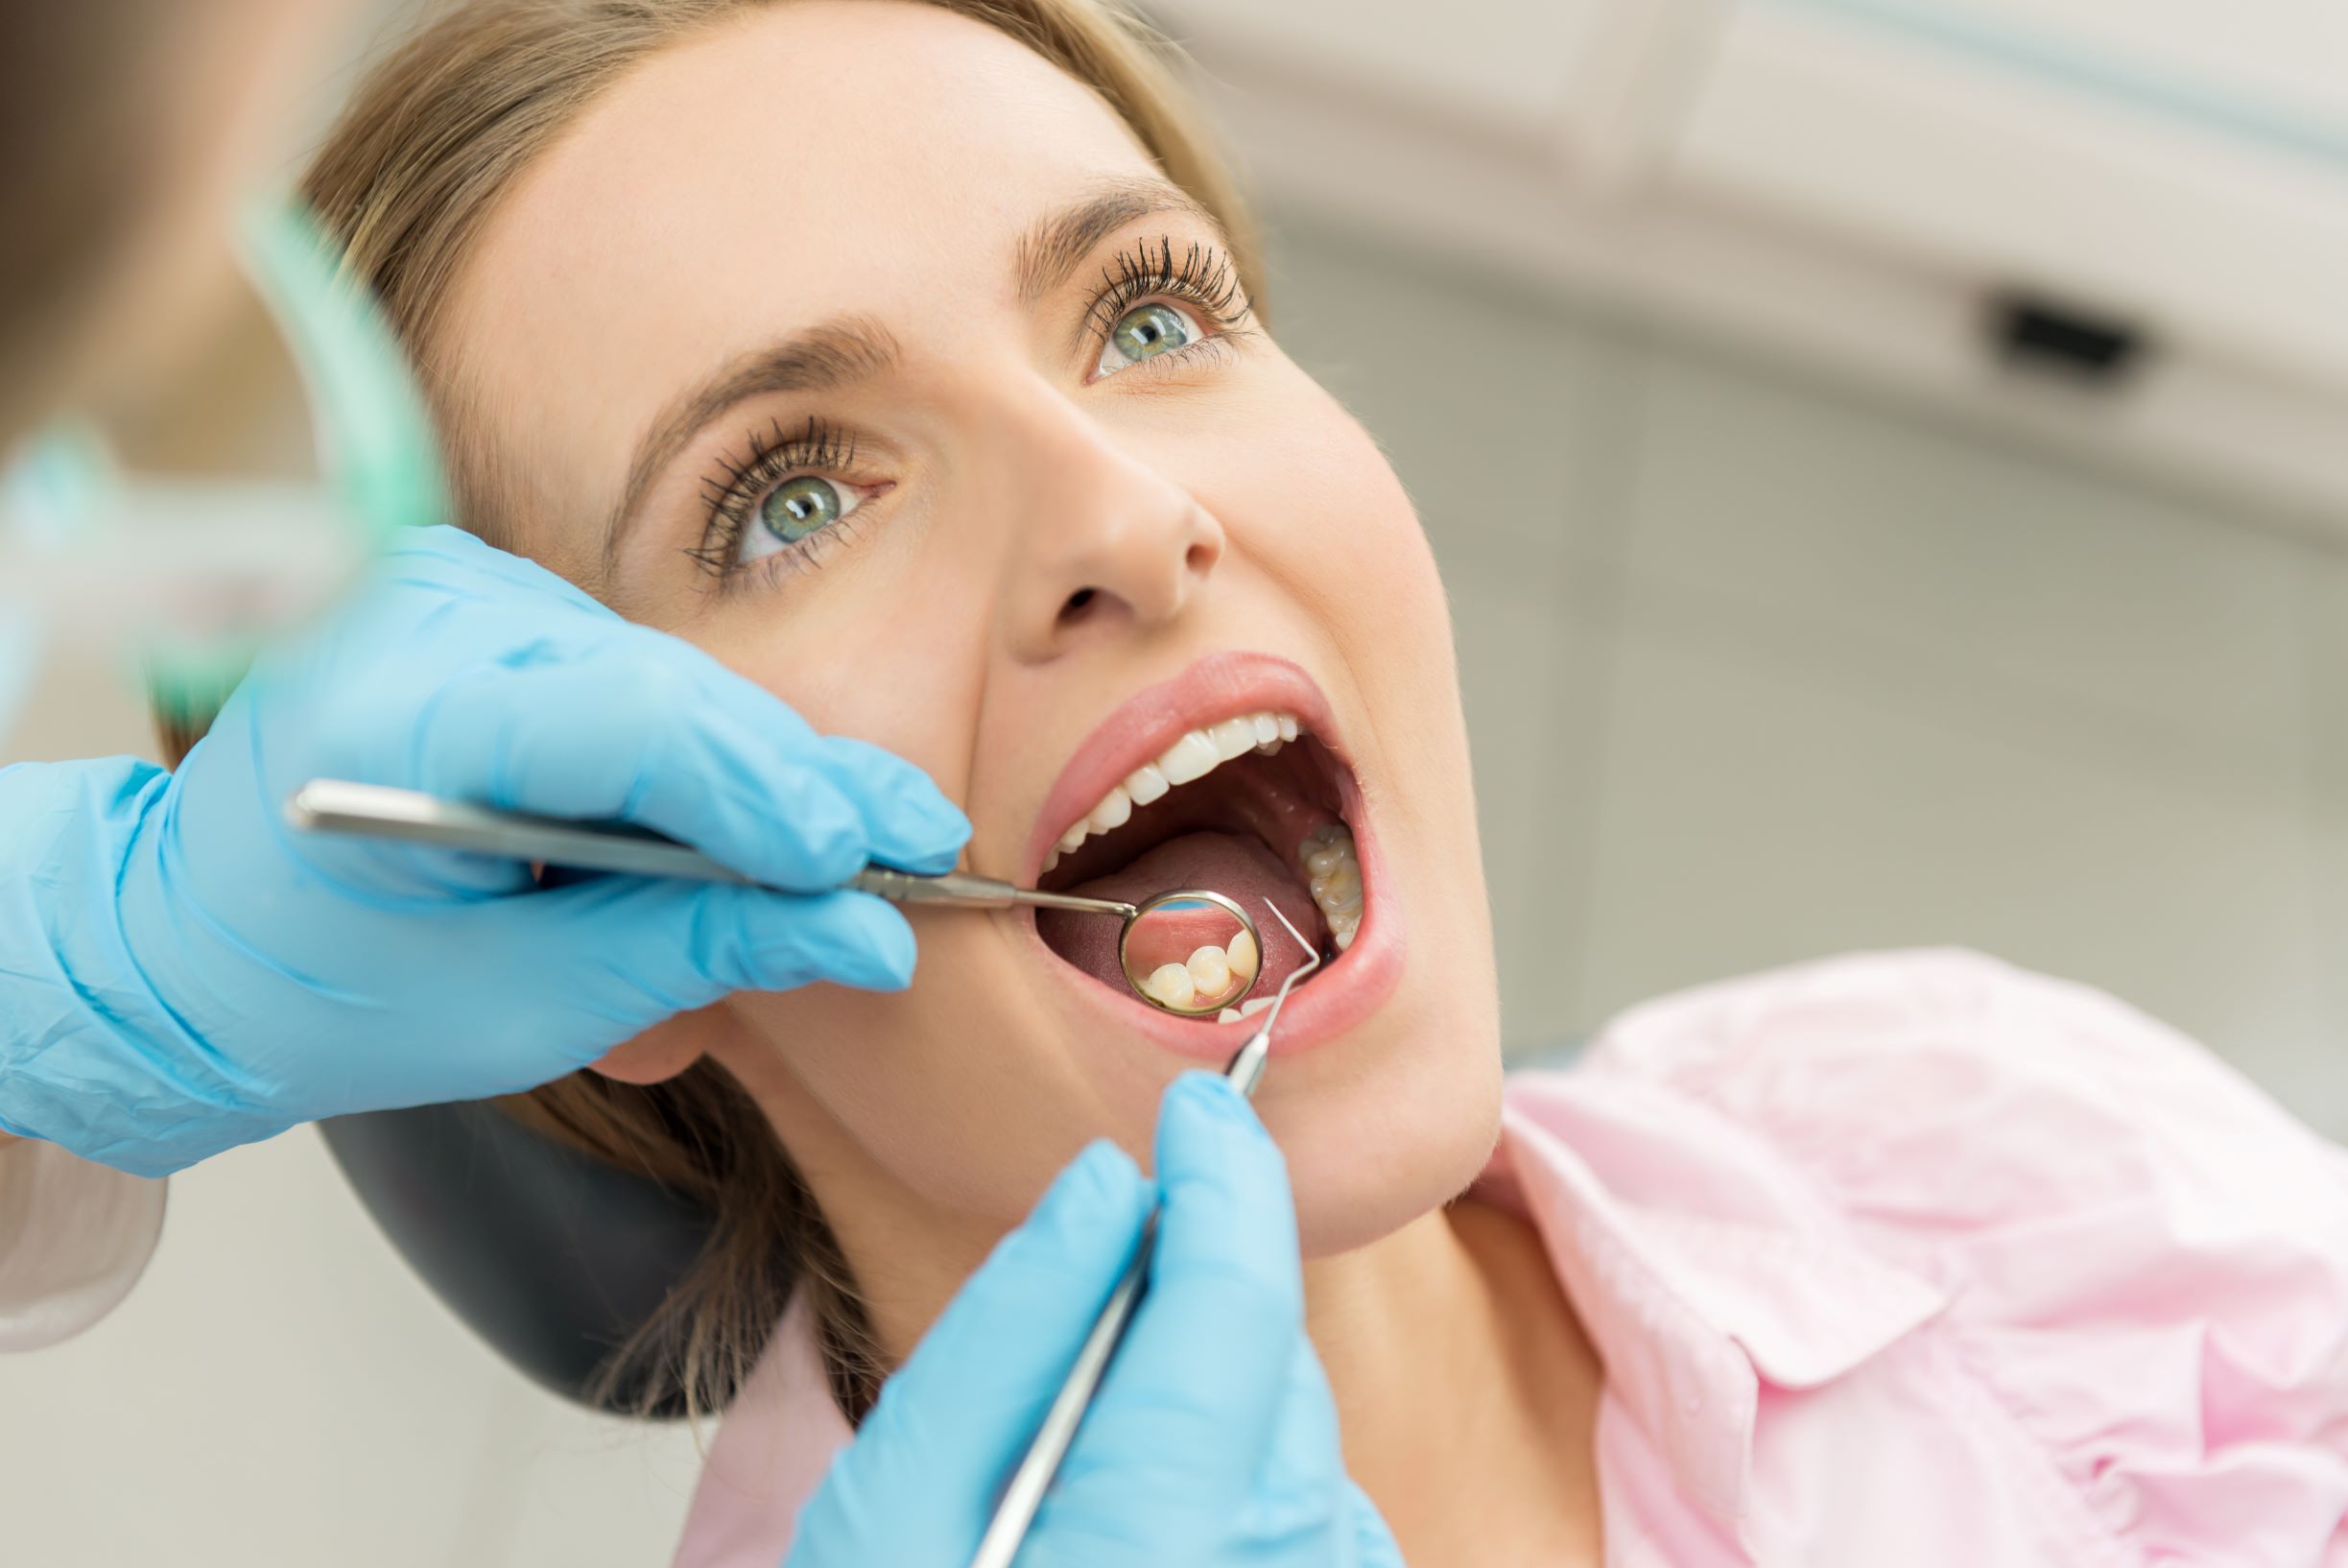 Dental scaling can really help clean your teeth to prevent gum disease.